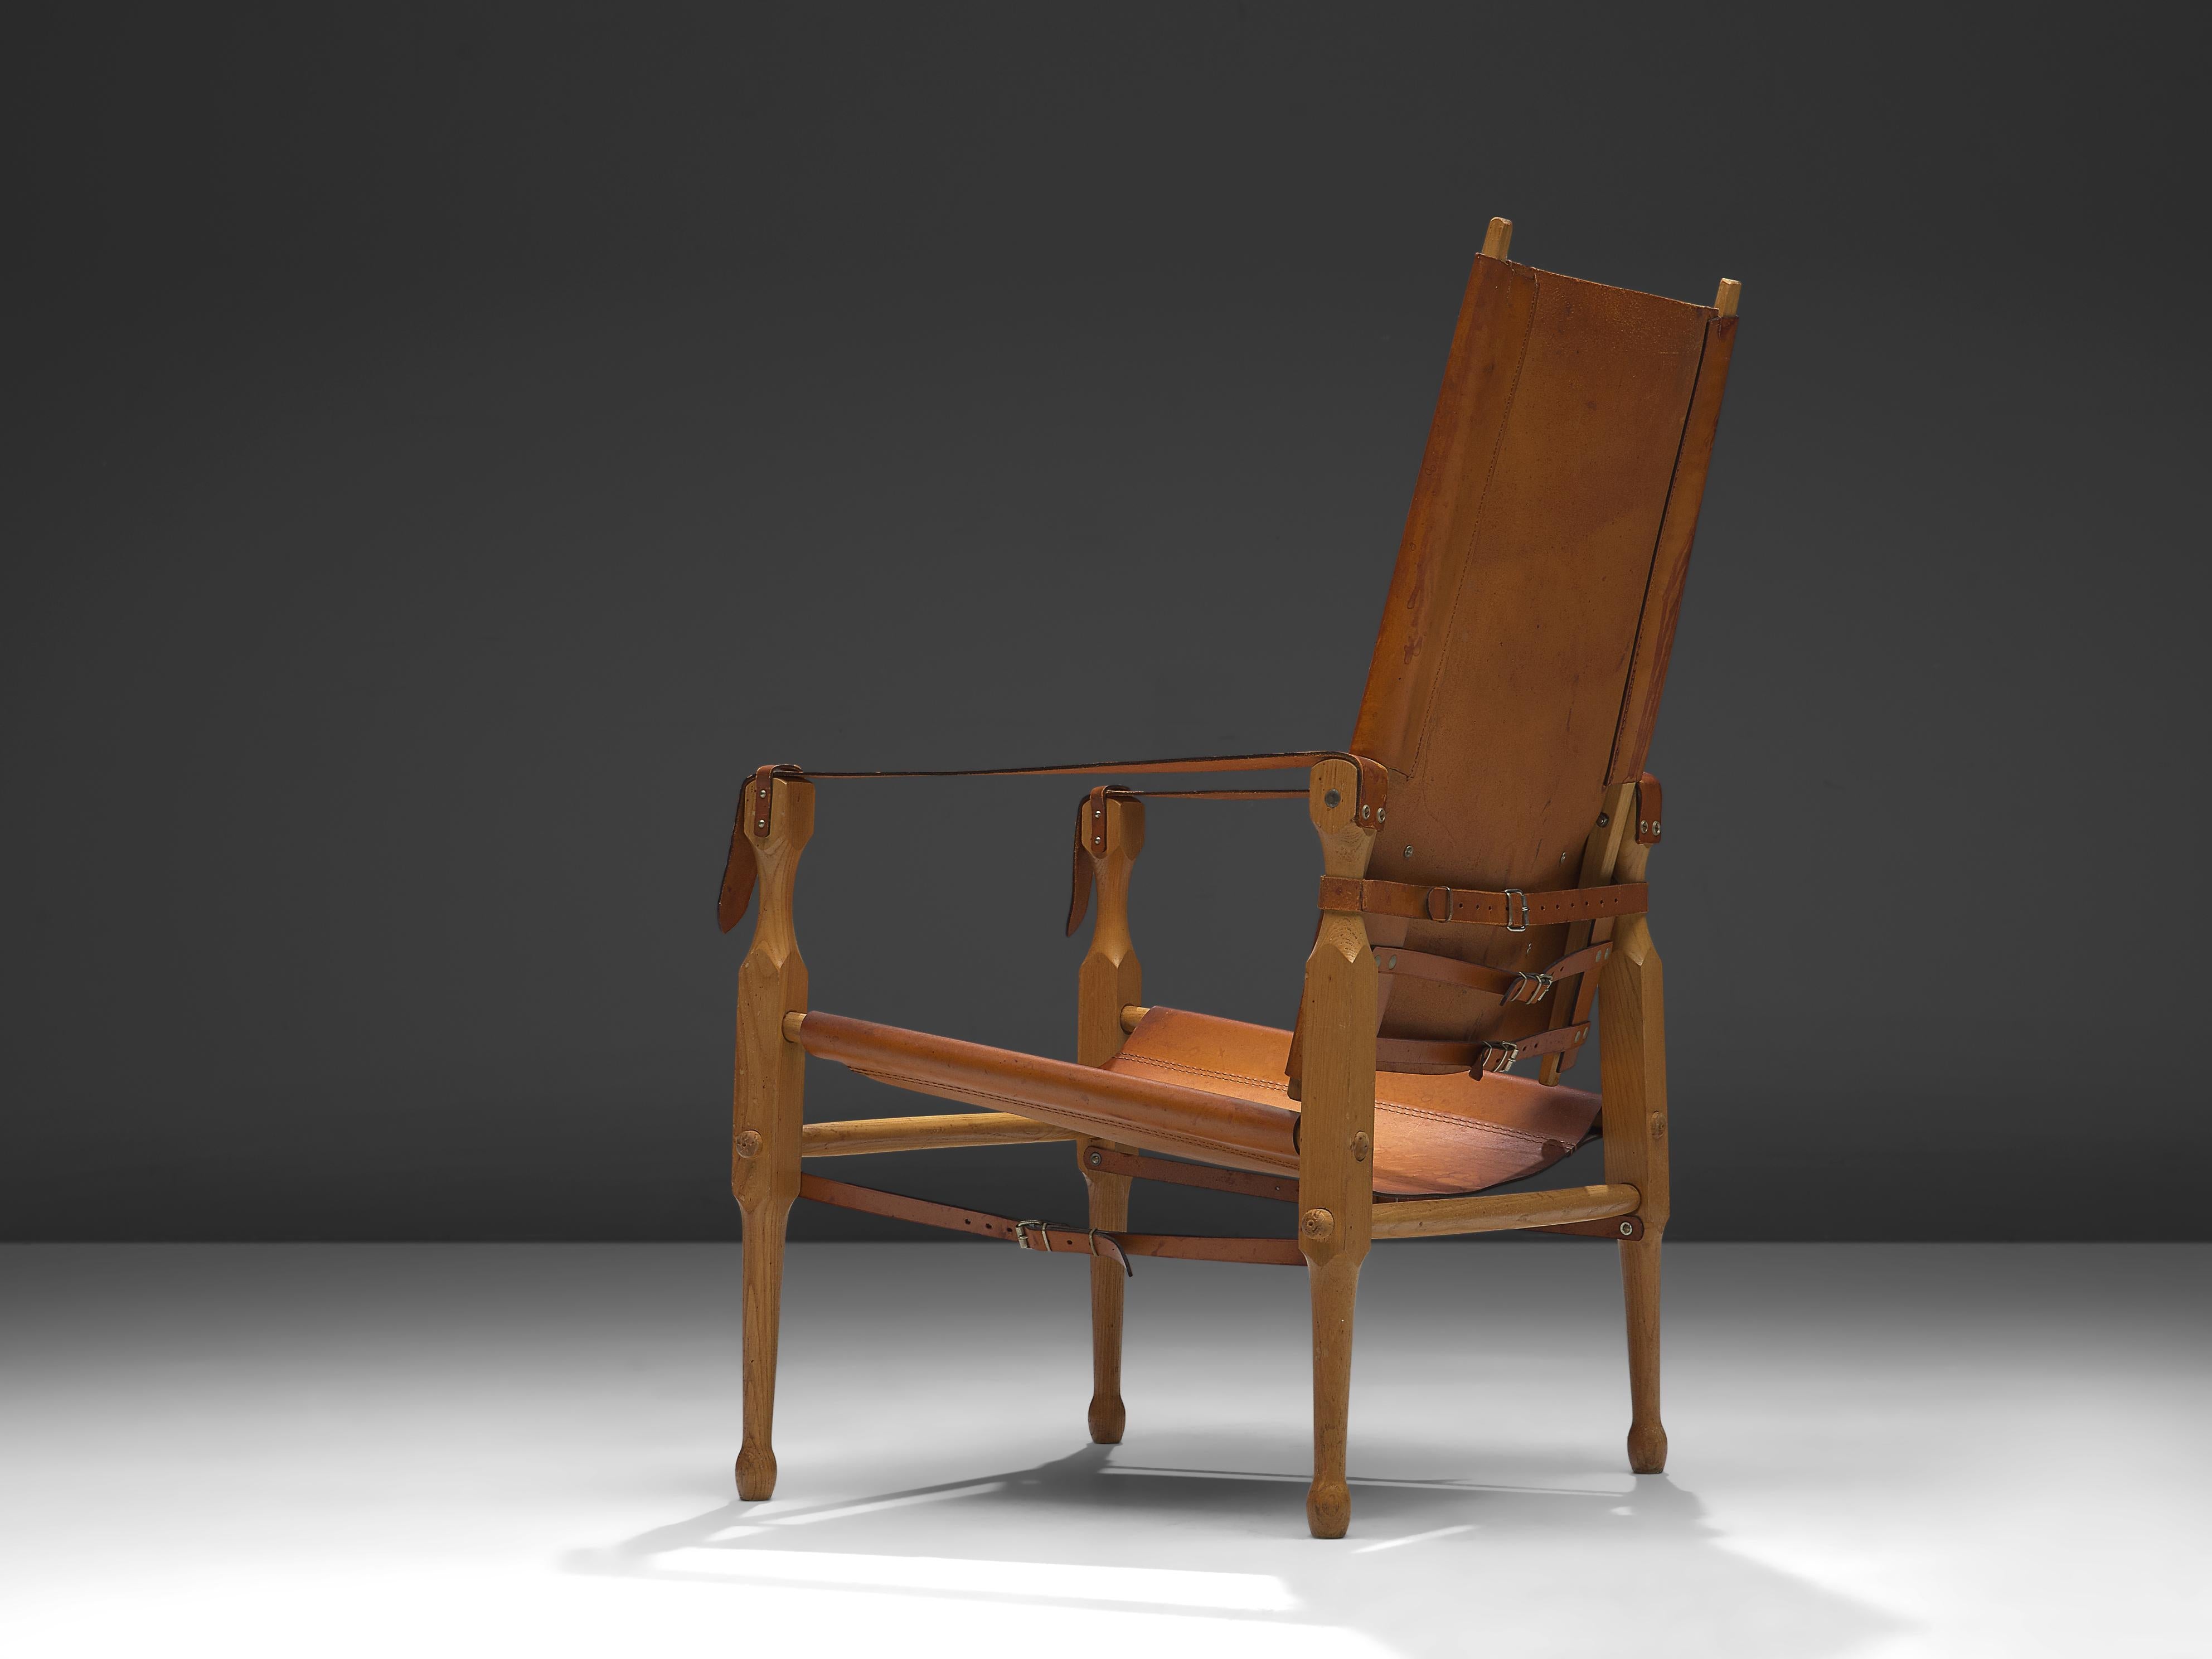 Danish ‘Safari’ Lounge Chair in Solid Ash and Cognac Leather